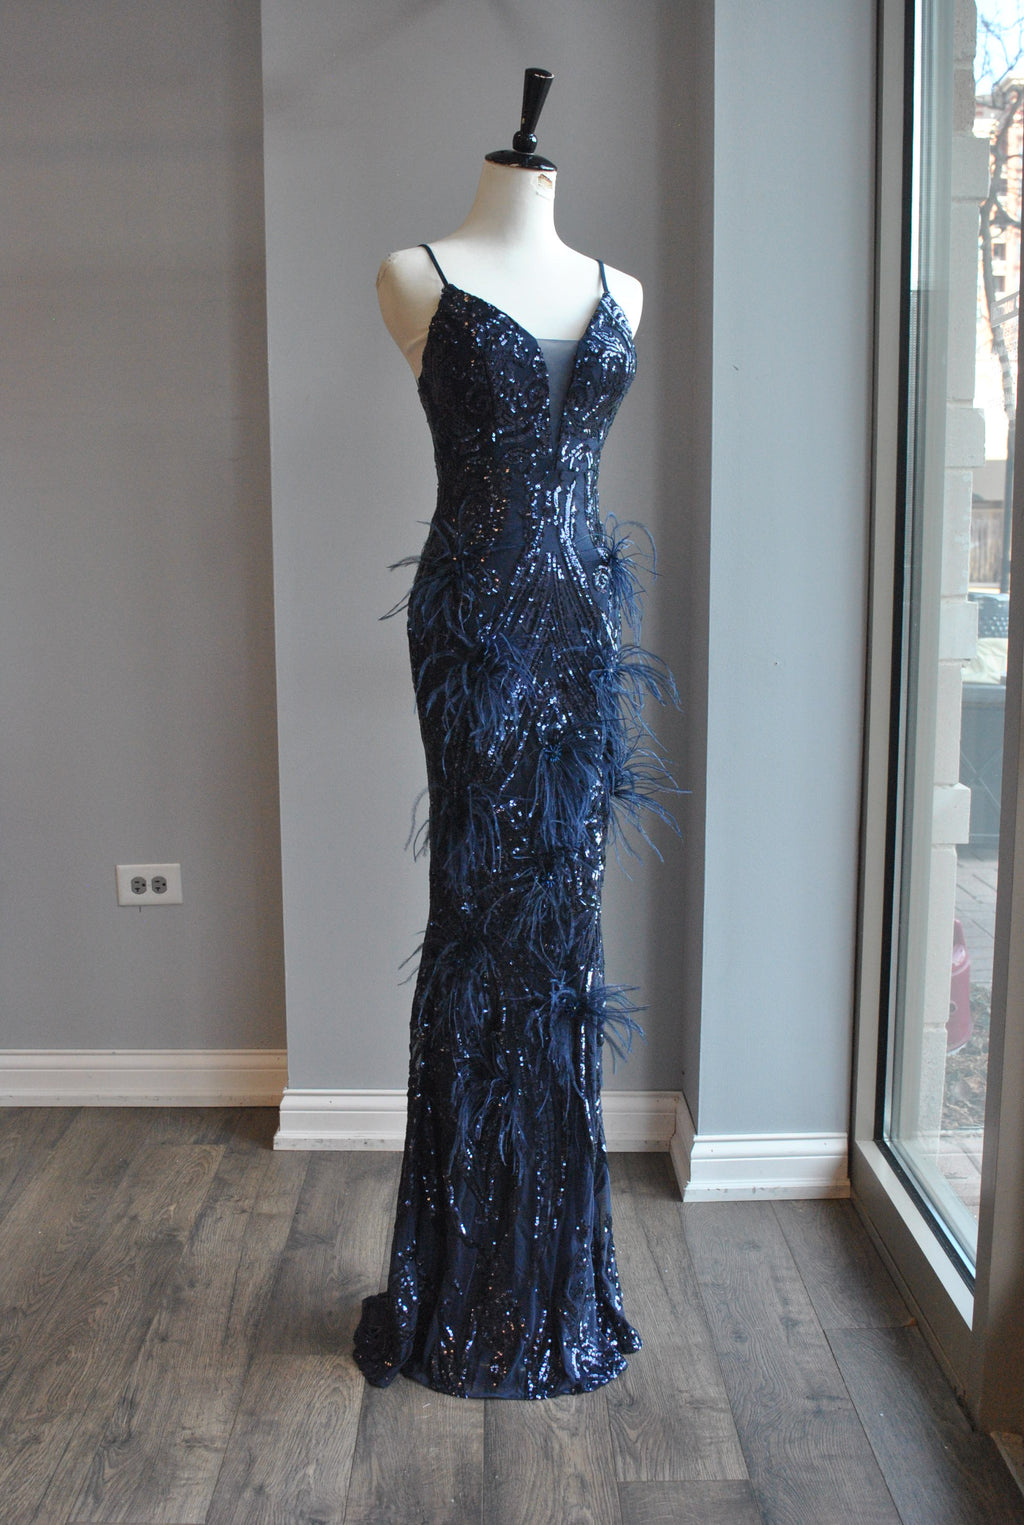 NAVY BLUE SEQUIN AND FEATHERS LONG EVENING DRESS